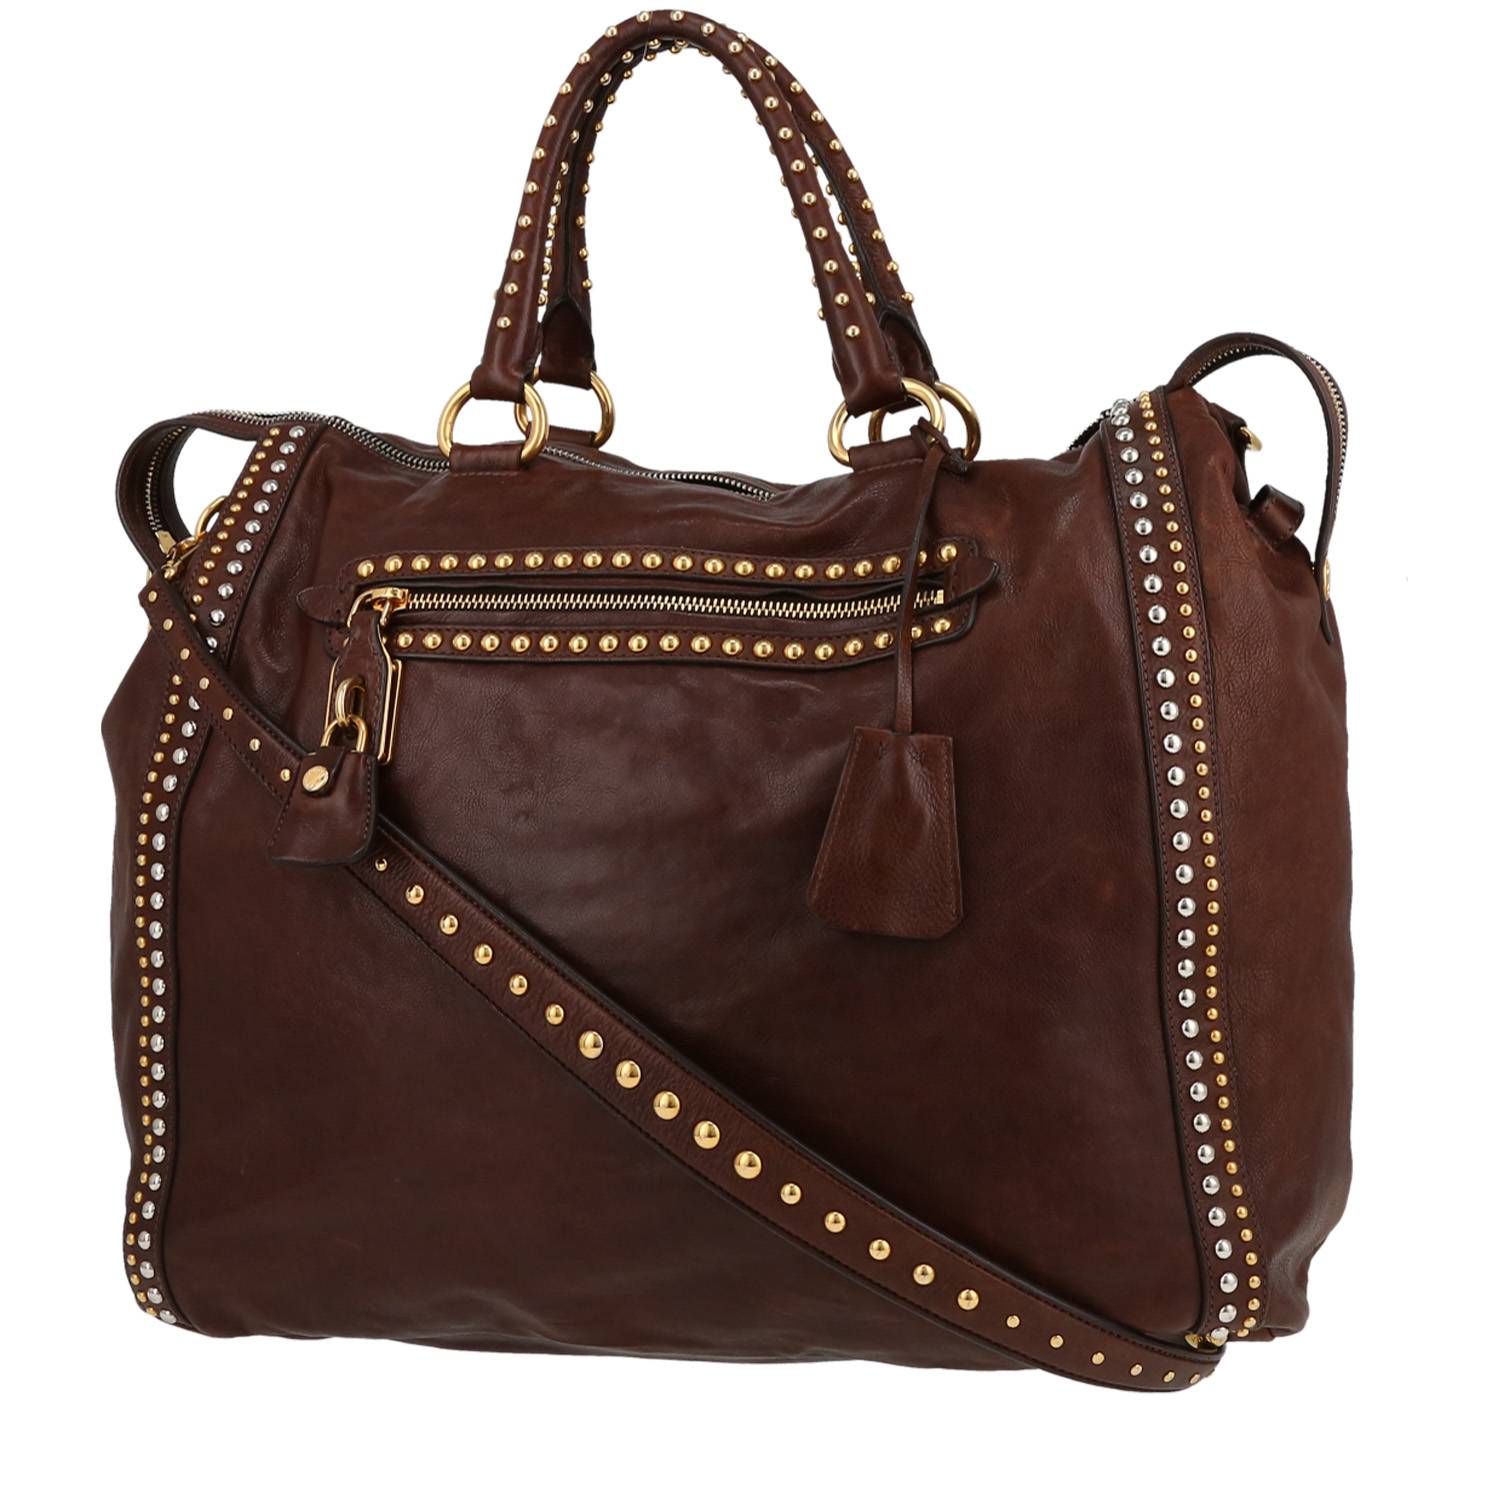 Handbag In Brown Grained Leather